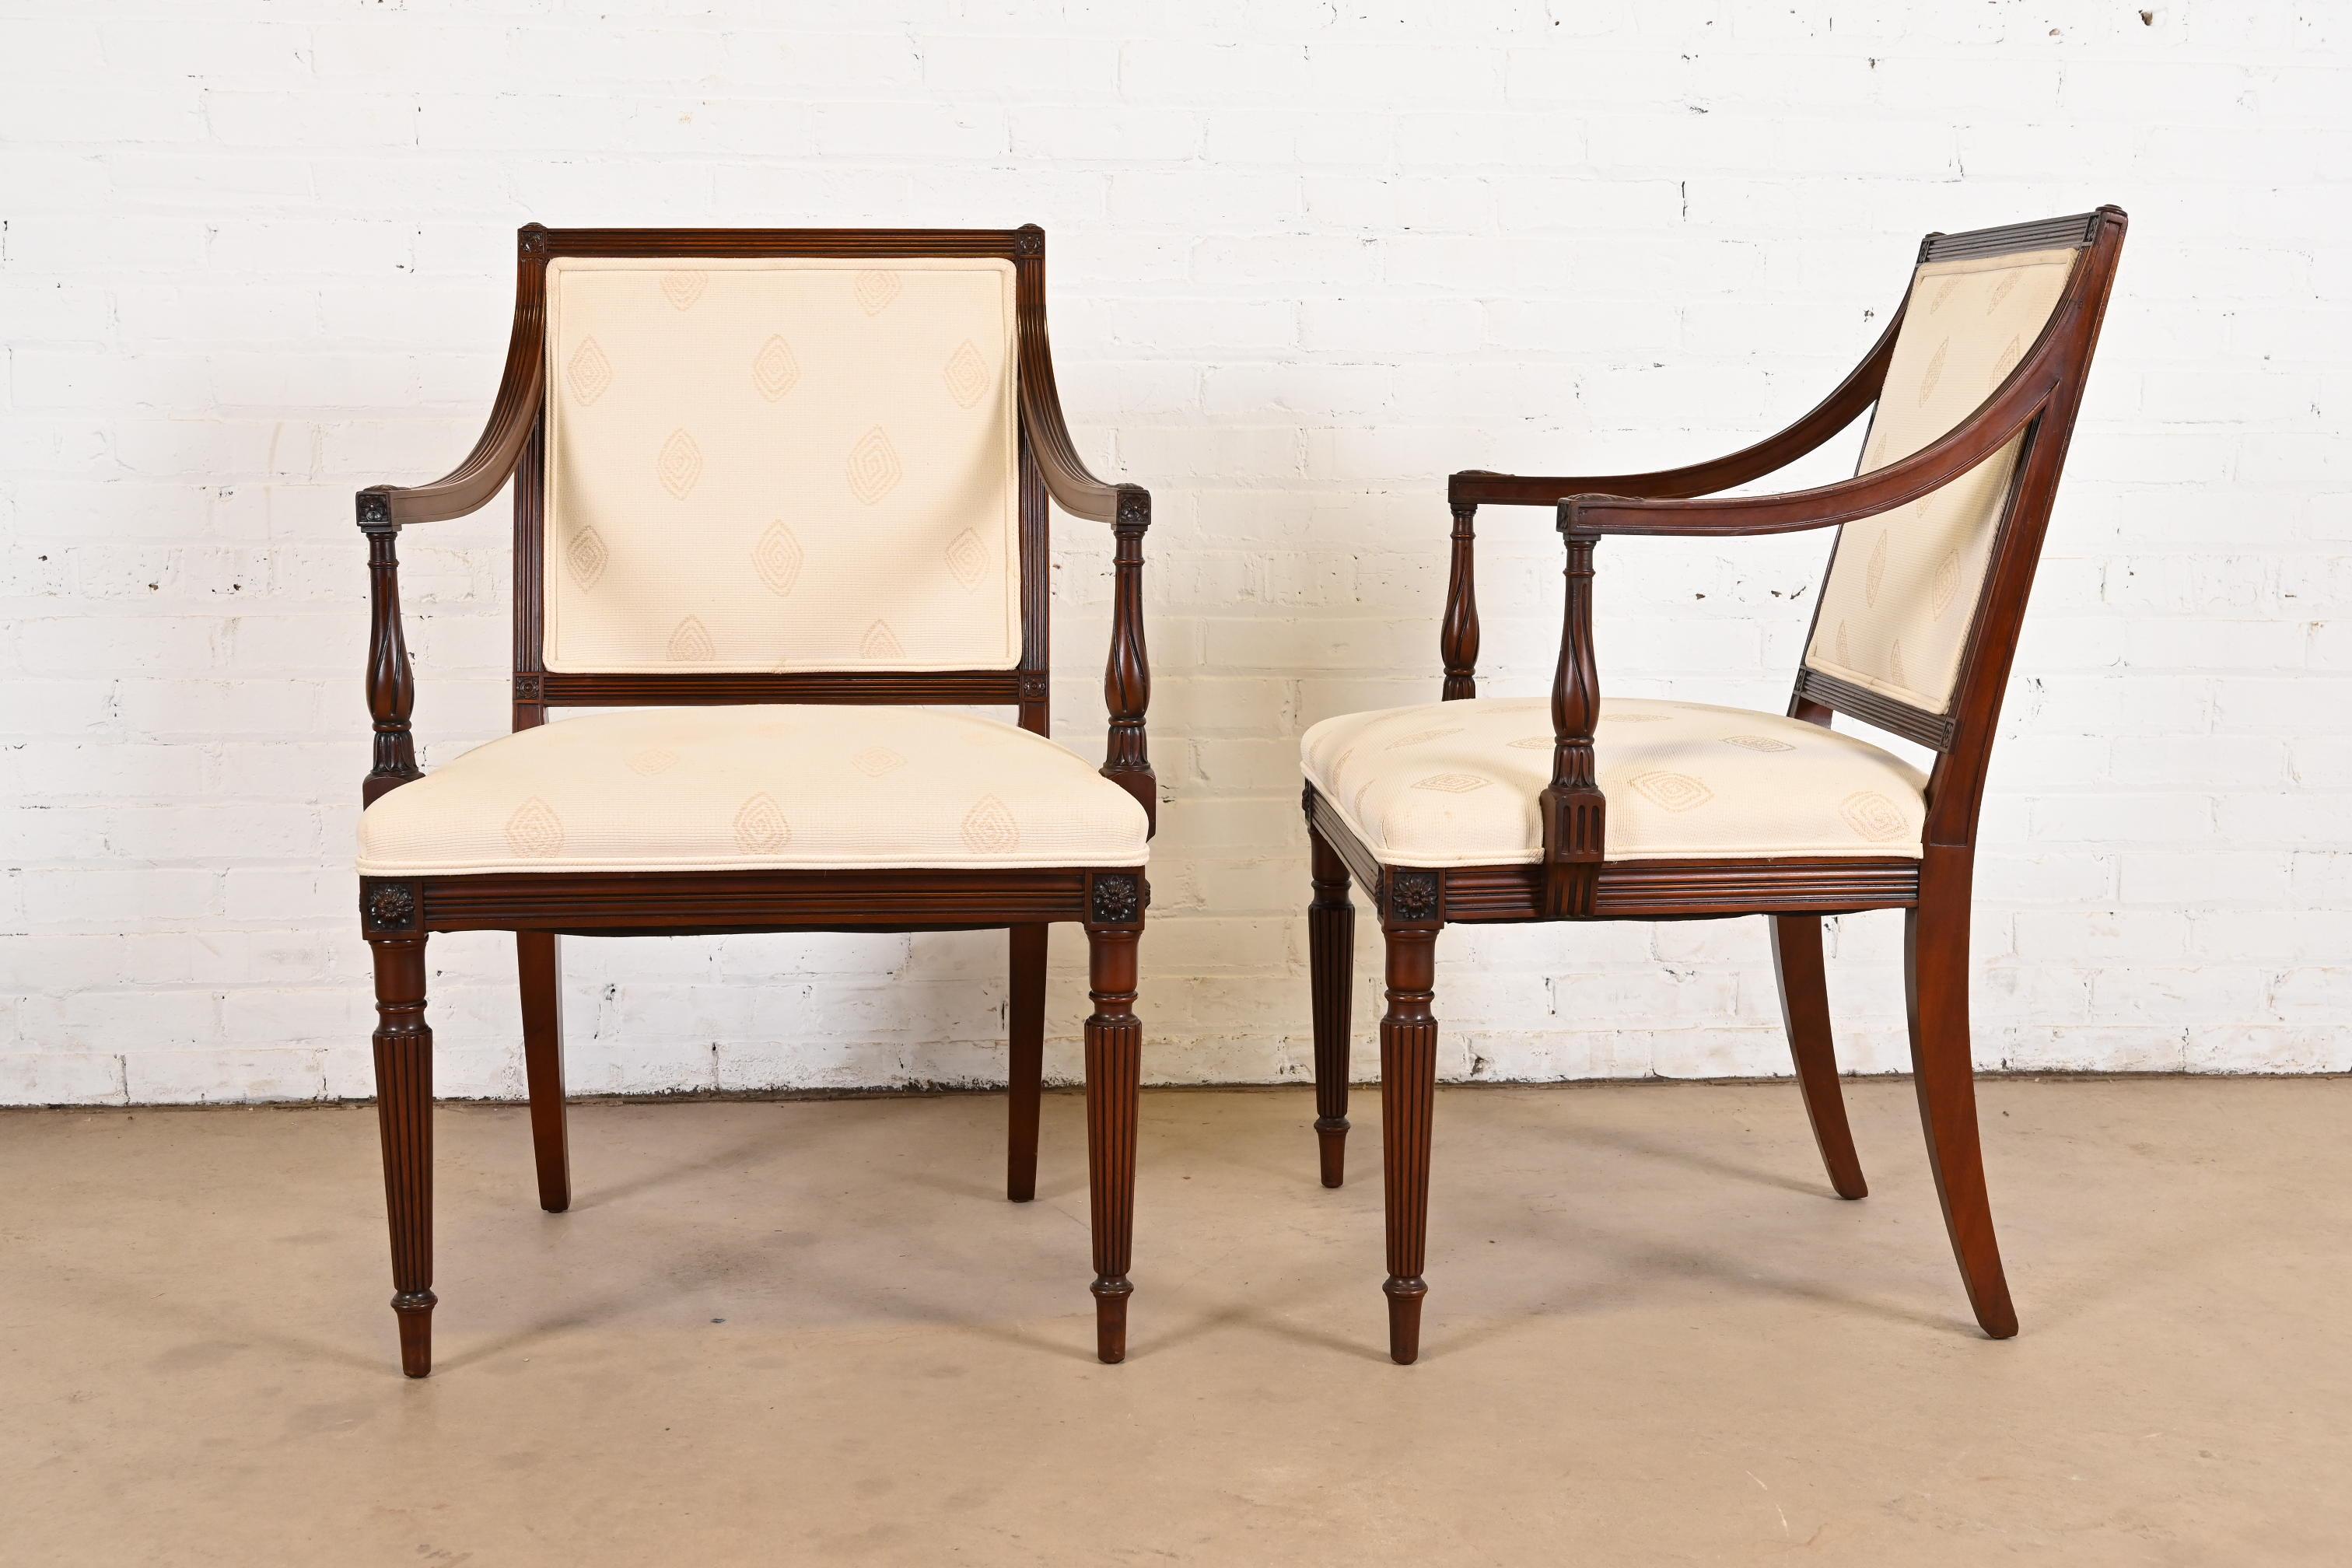 French Regency Louis XVI Carved Mahogany Arm Chairs, Pair For Sale 5